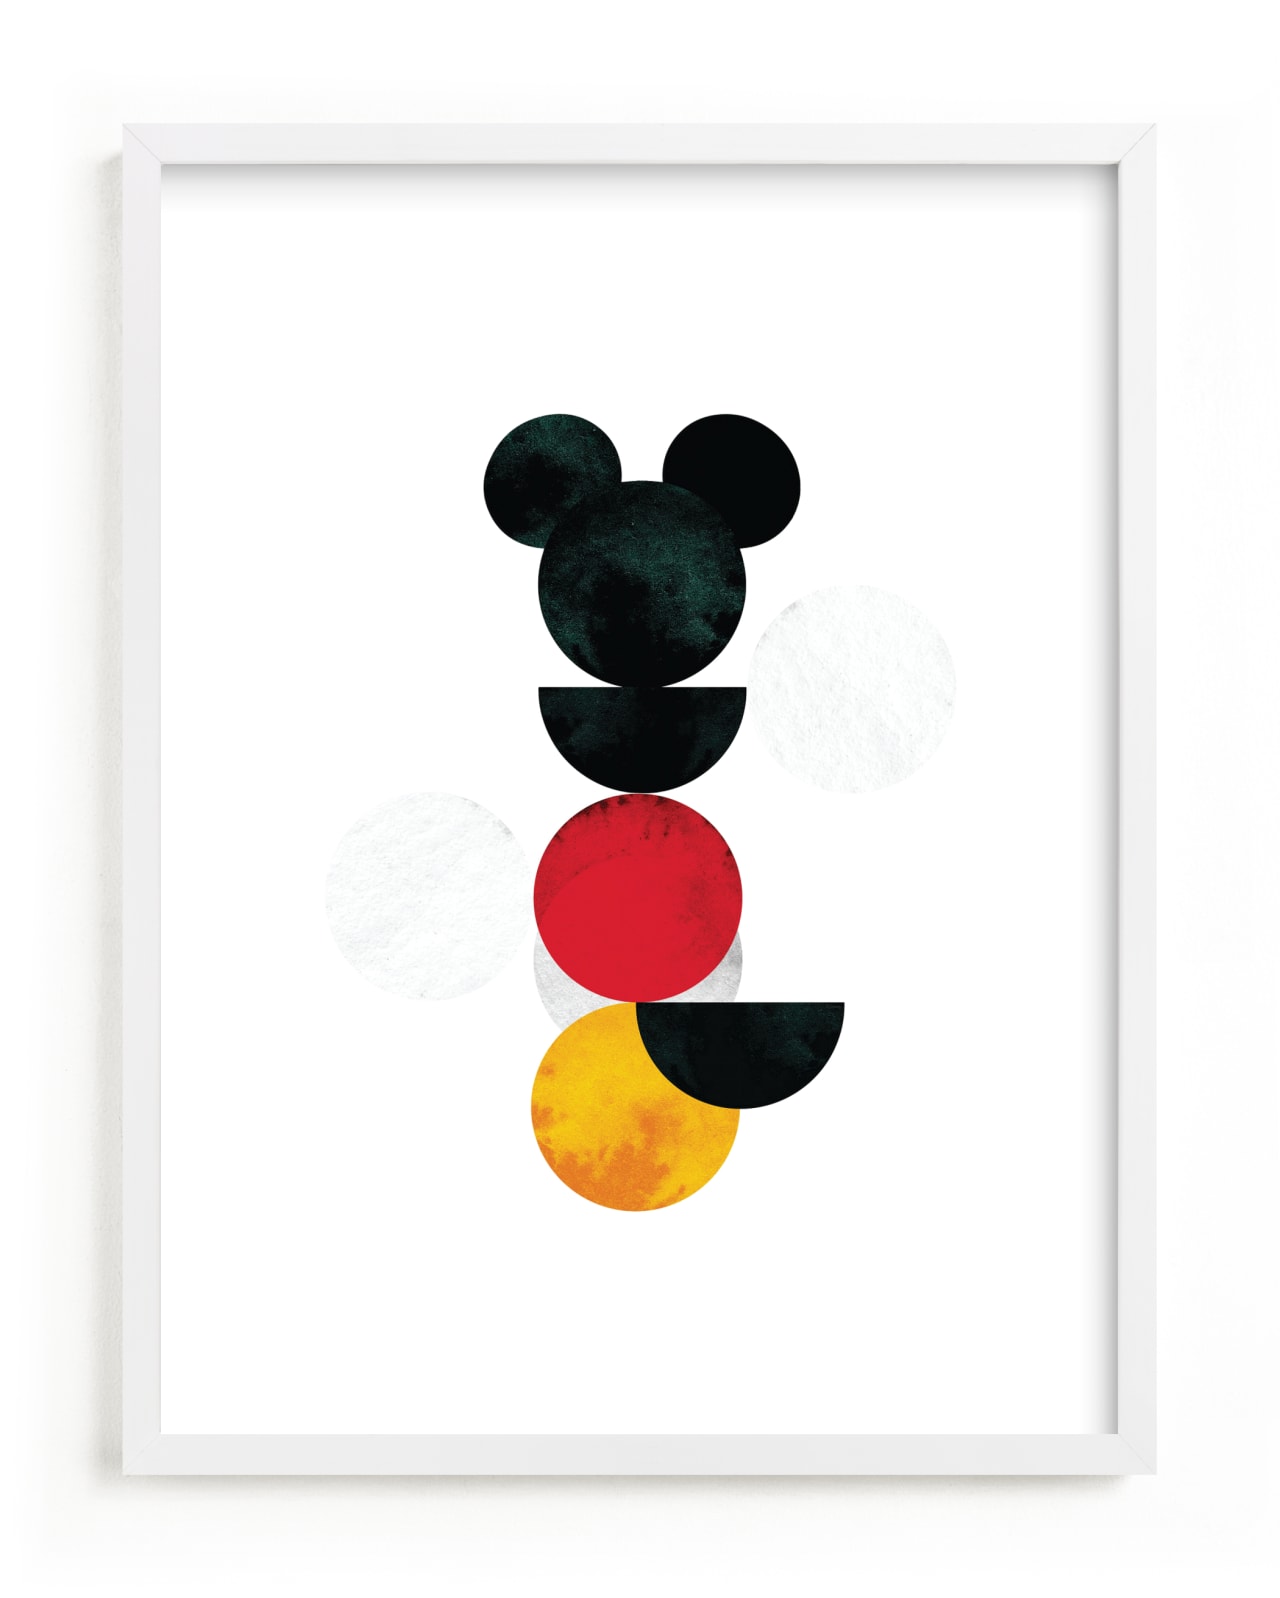 This is a yellow disney art by Anna Joseph called Minimalist | Mickey Mouse.